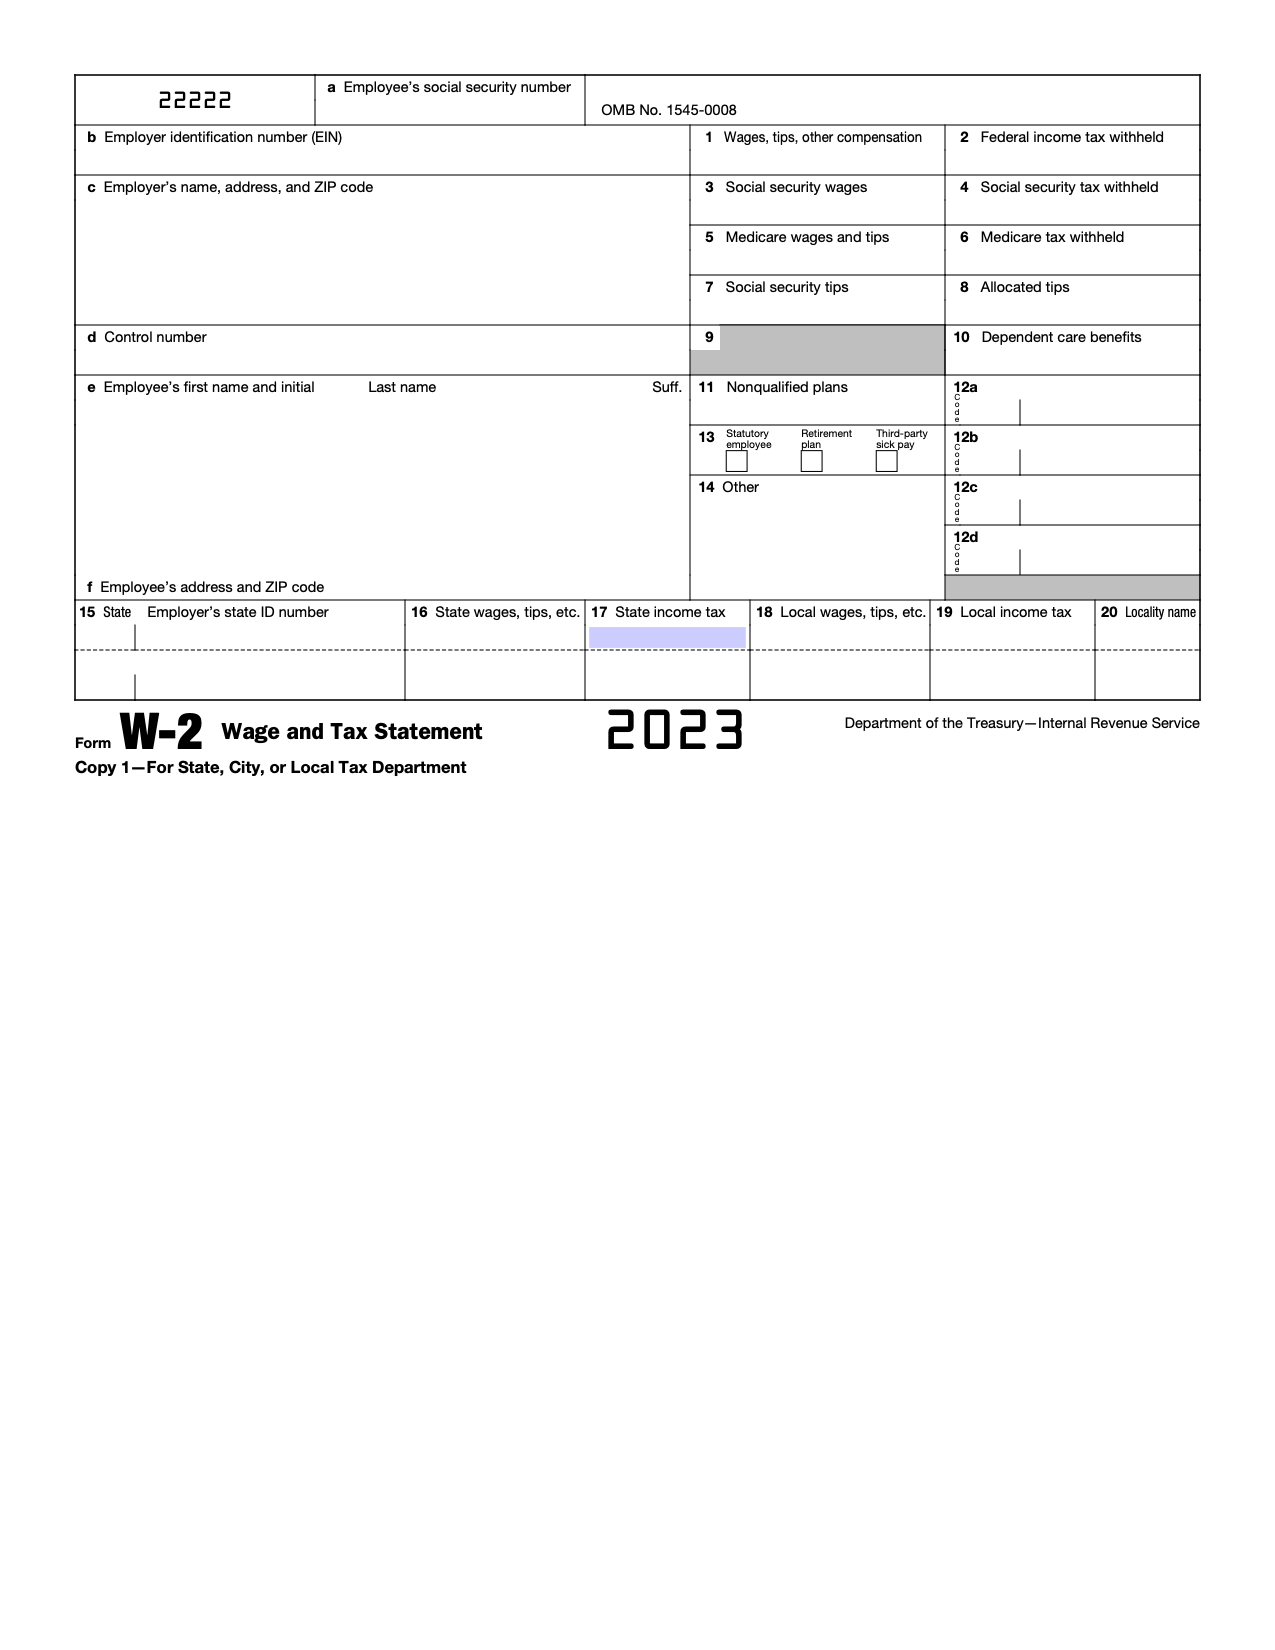 Free Irs Form W-2 | Wage And Tax Statement - Pdf – Eforms throughout Create W2 Form Free